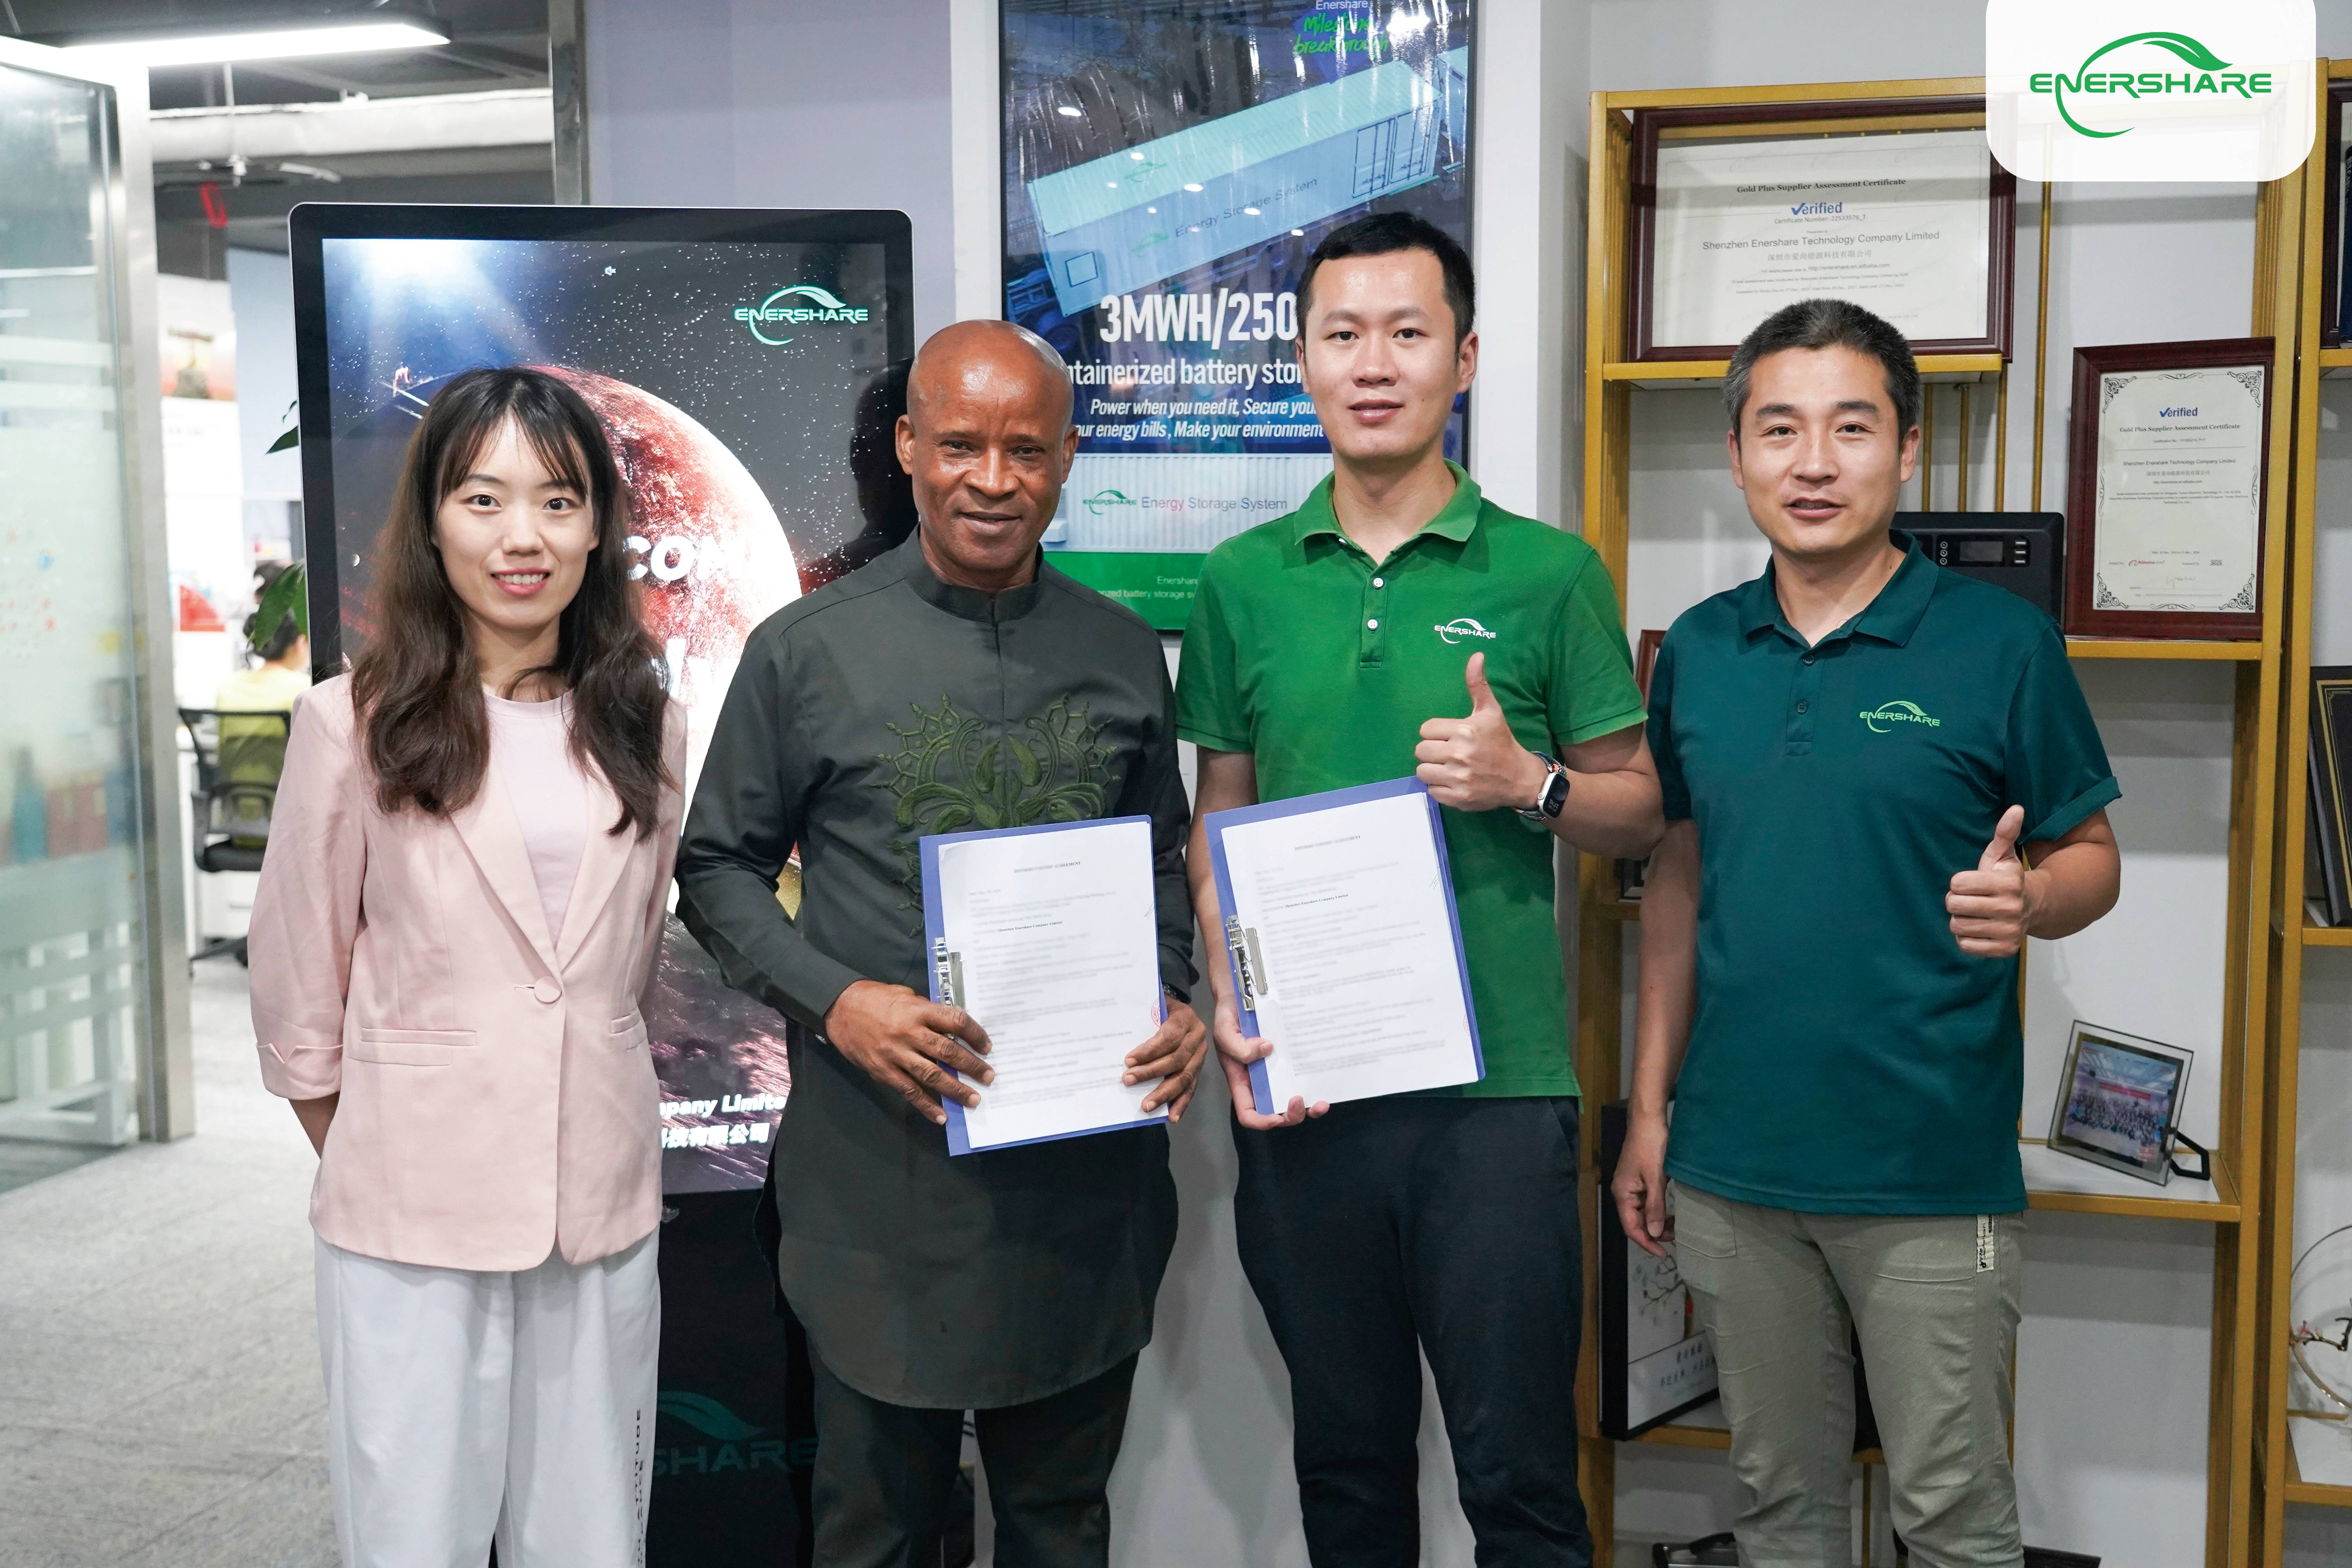 Enershare Energy successfully signed a dealer cooperation agreement with Nigerian customer.